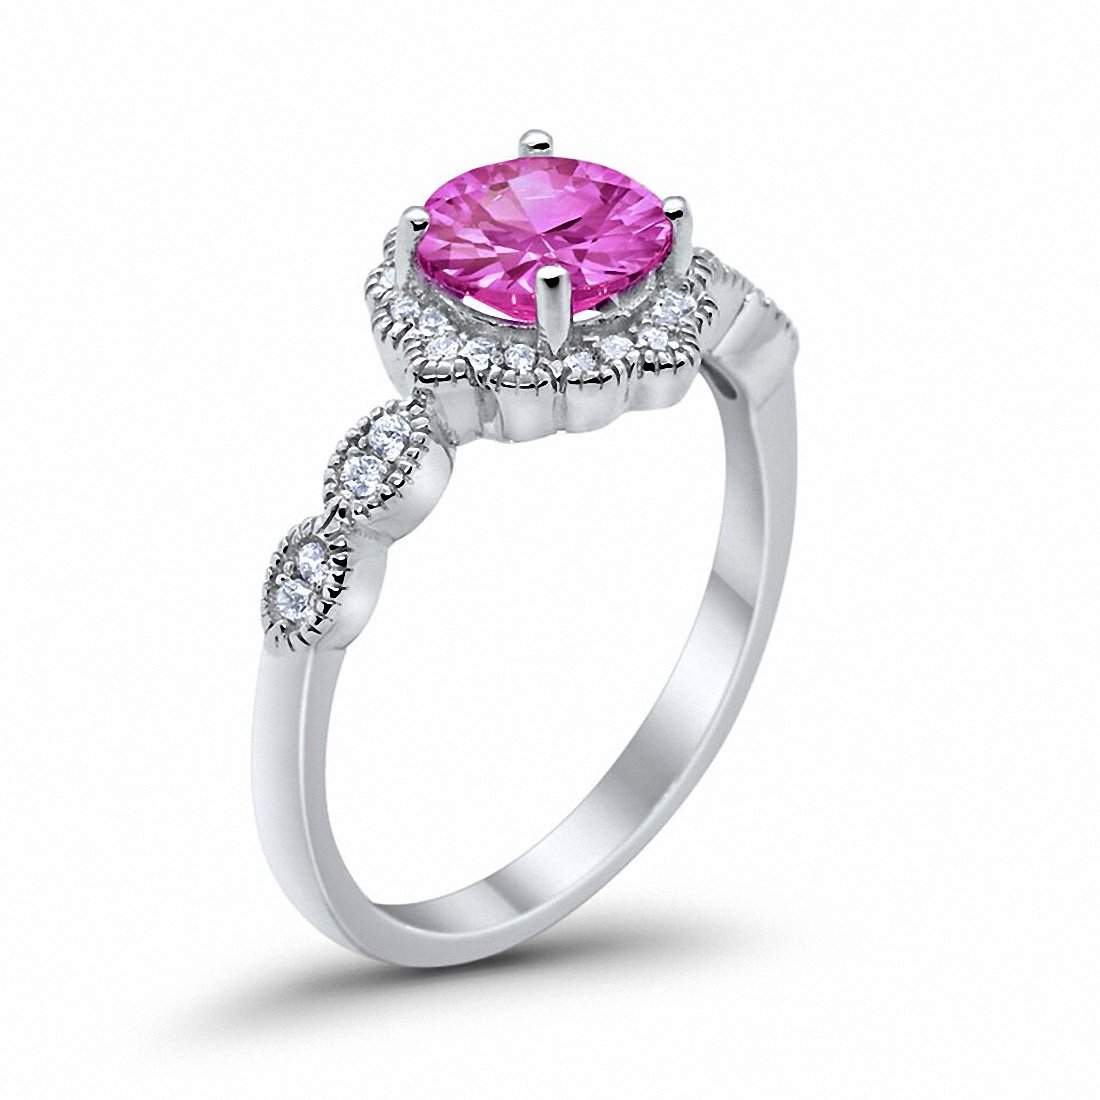 Floral Art Engagement Ring Simulated Pink Cubic Zirconia 925 Sterling Silver